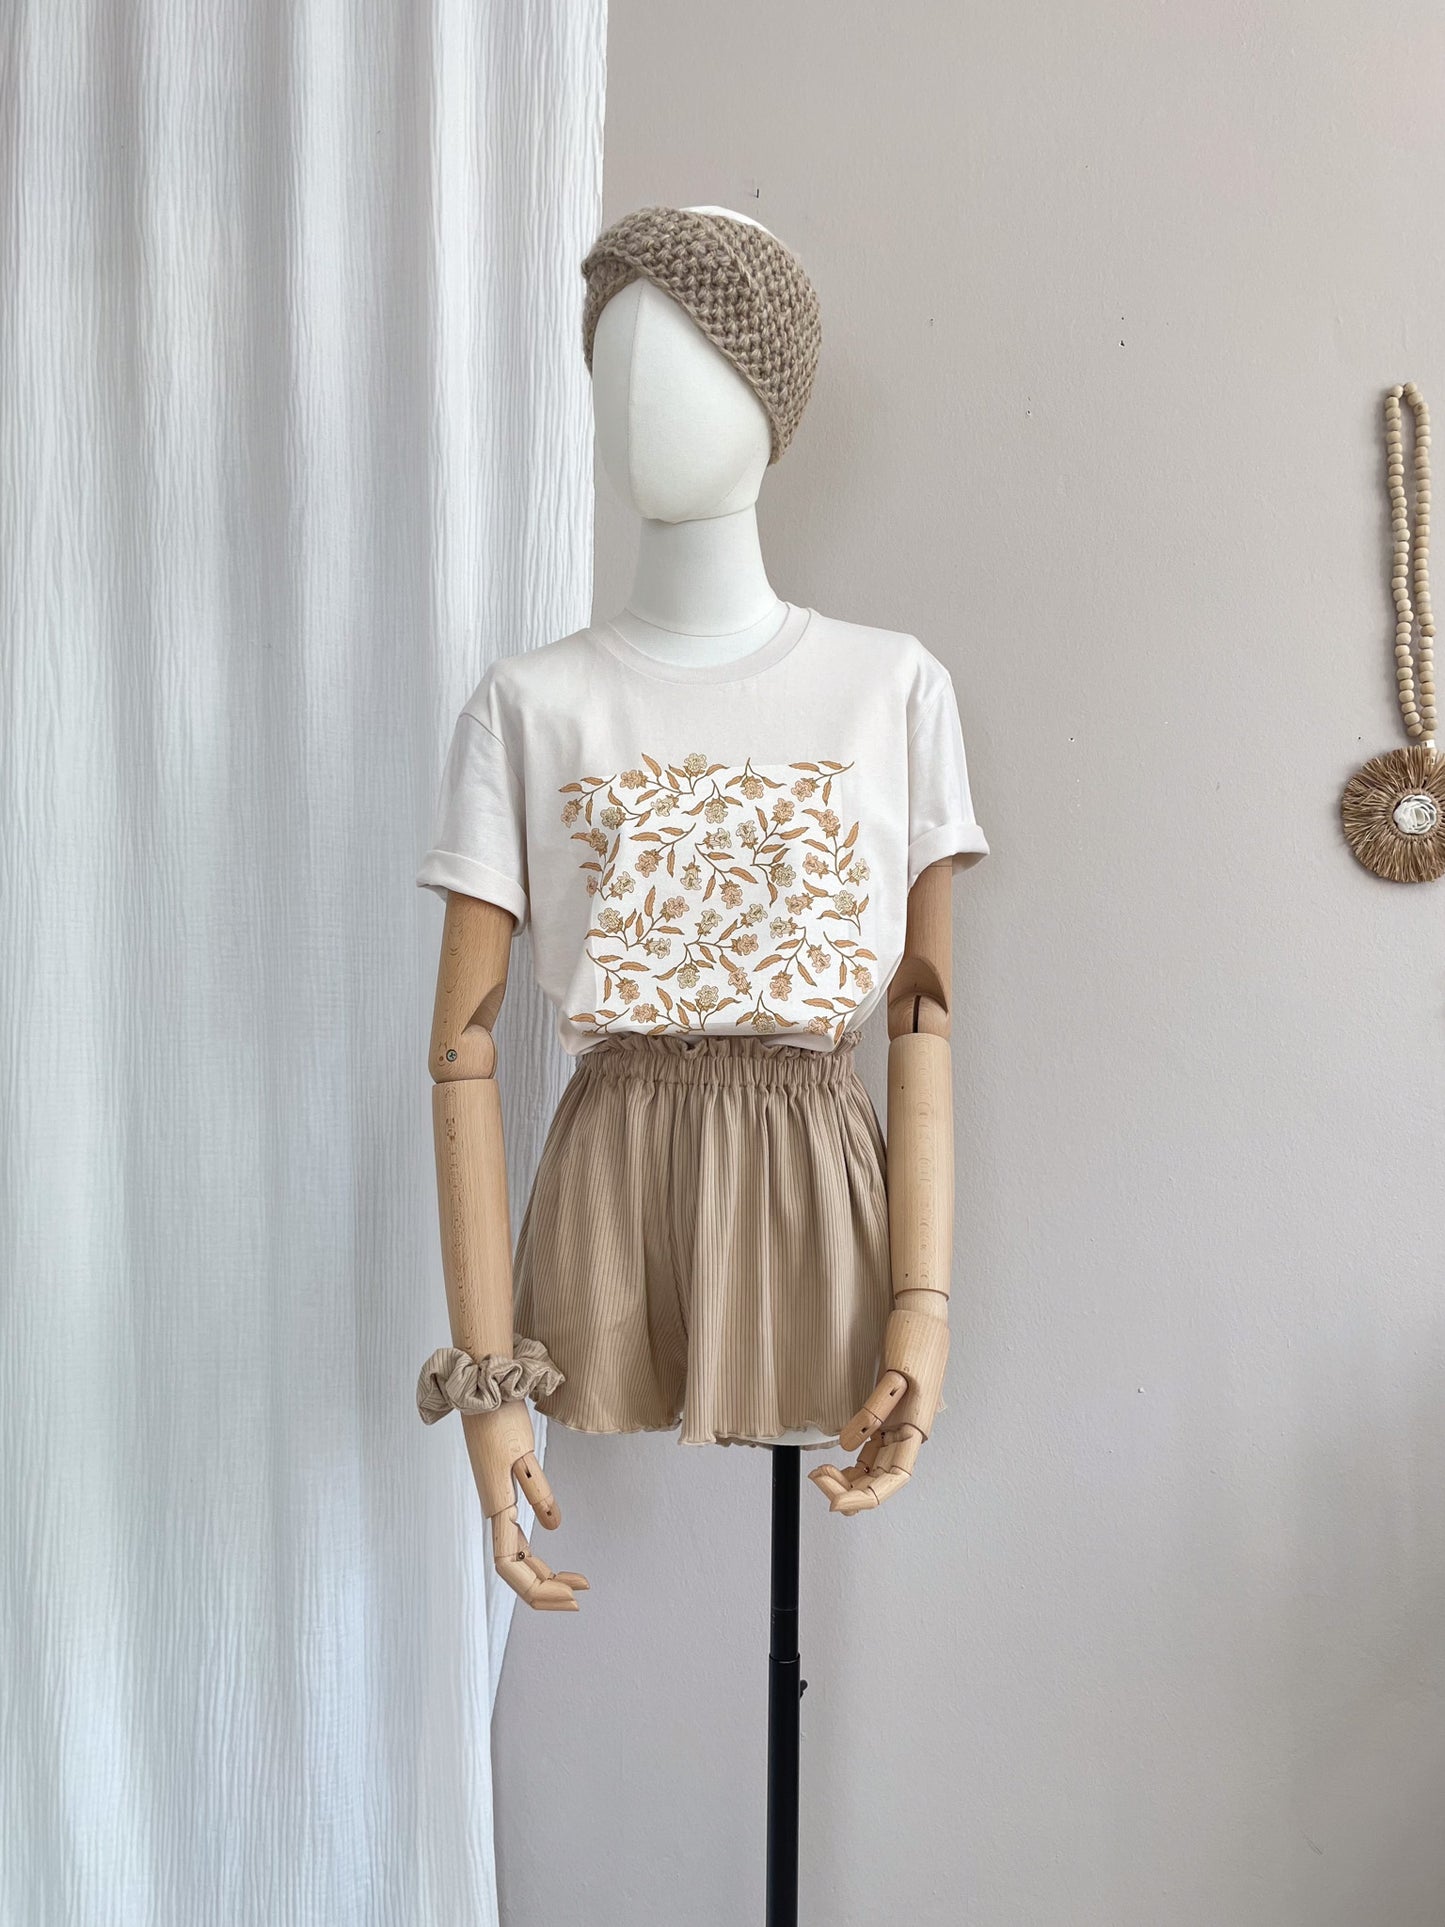 Load image into Gallery viewer, T-shirt / Bell Flowers / vintage white
